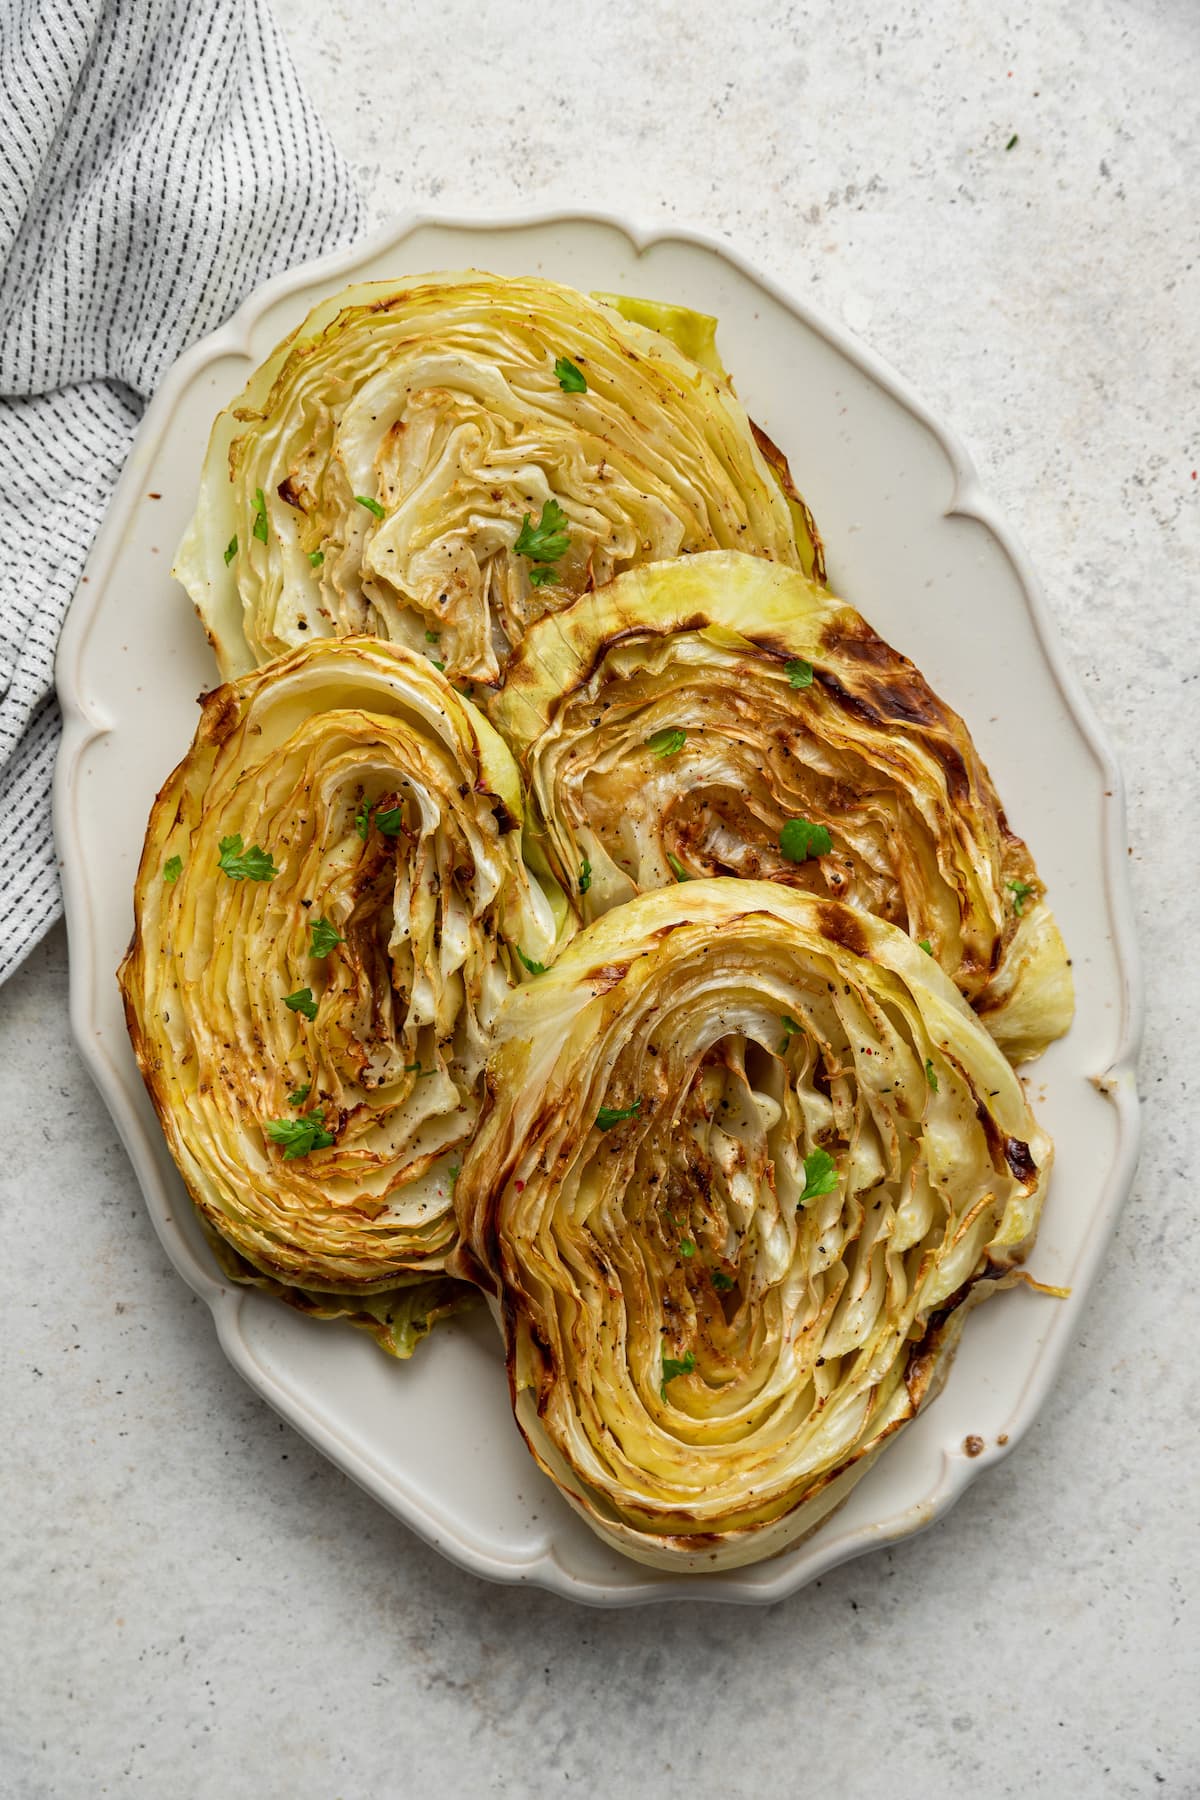 Roasted cabbage on a serving platter.